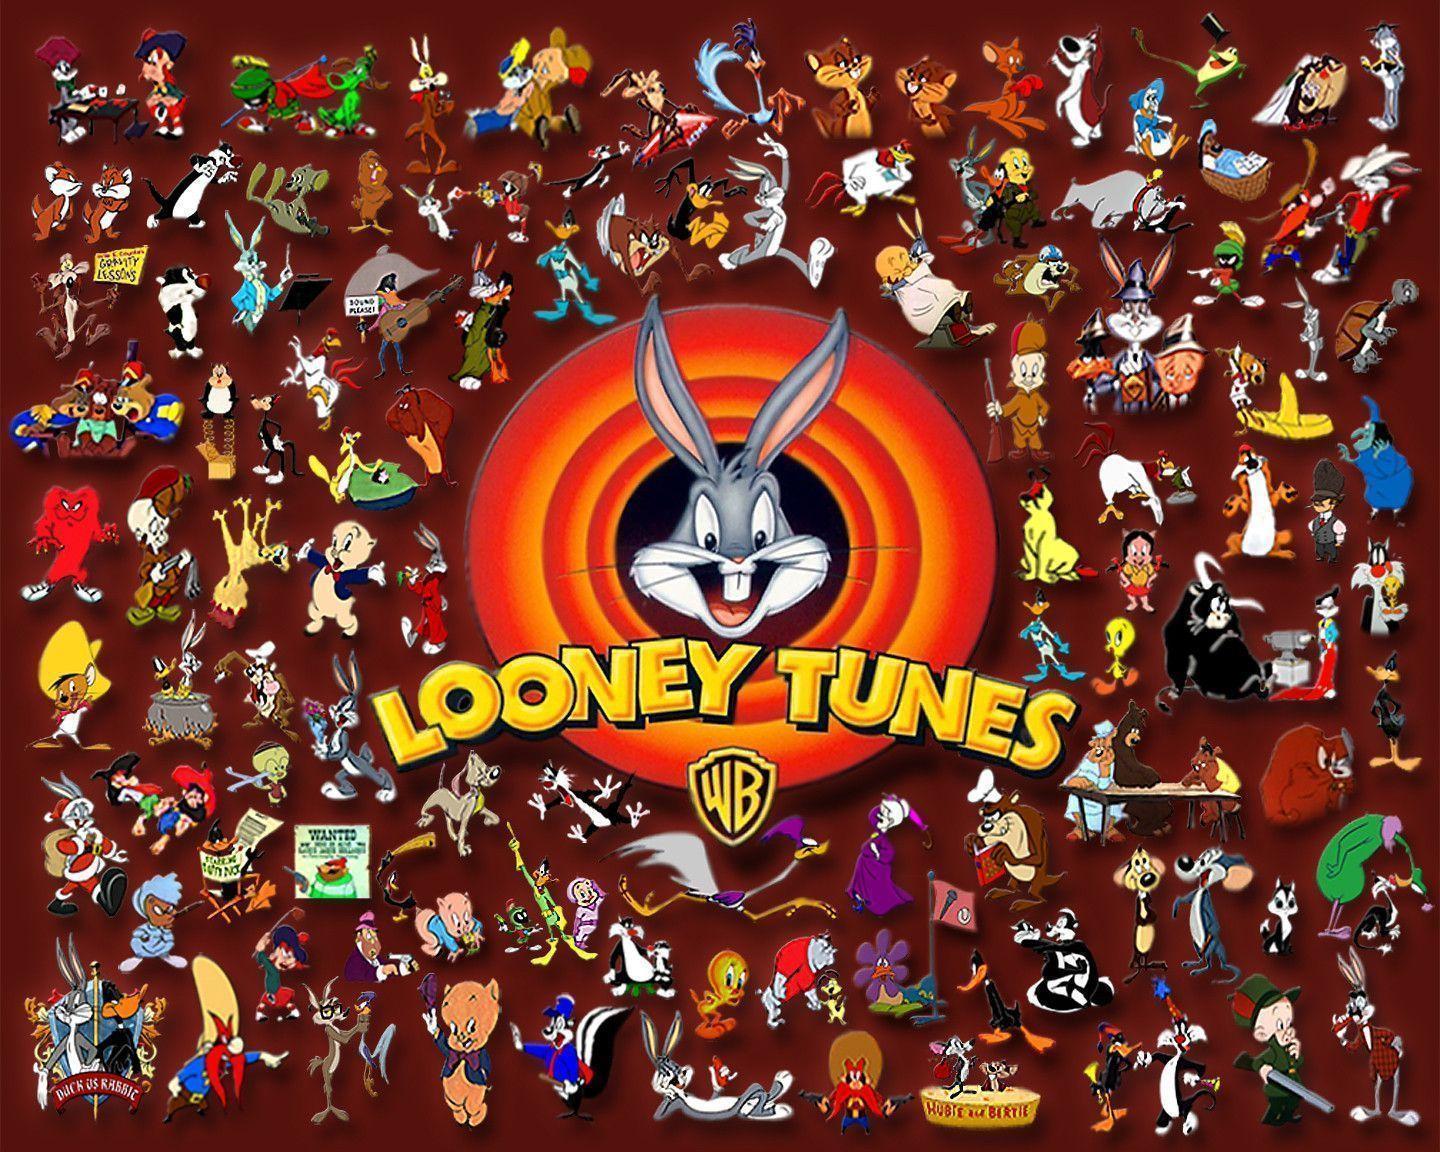 Steve Carell Attached to Upcoming Looney Tunes Movie &